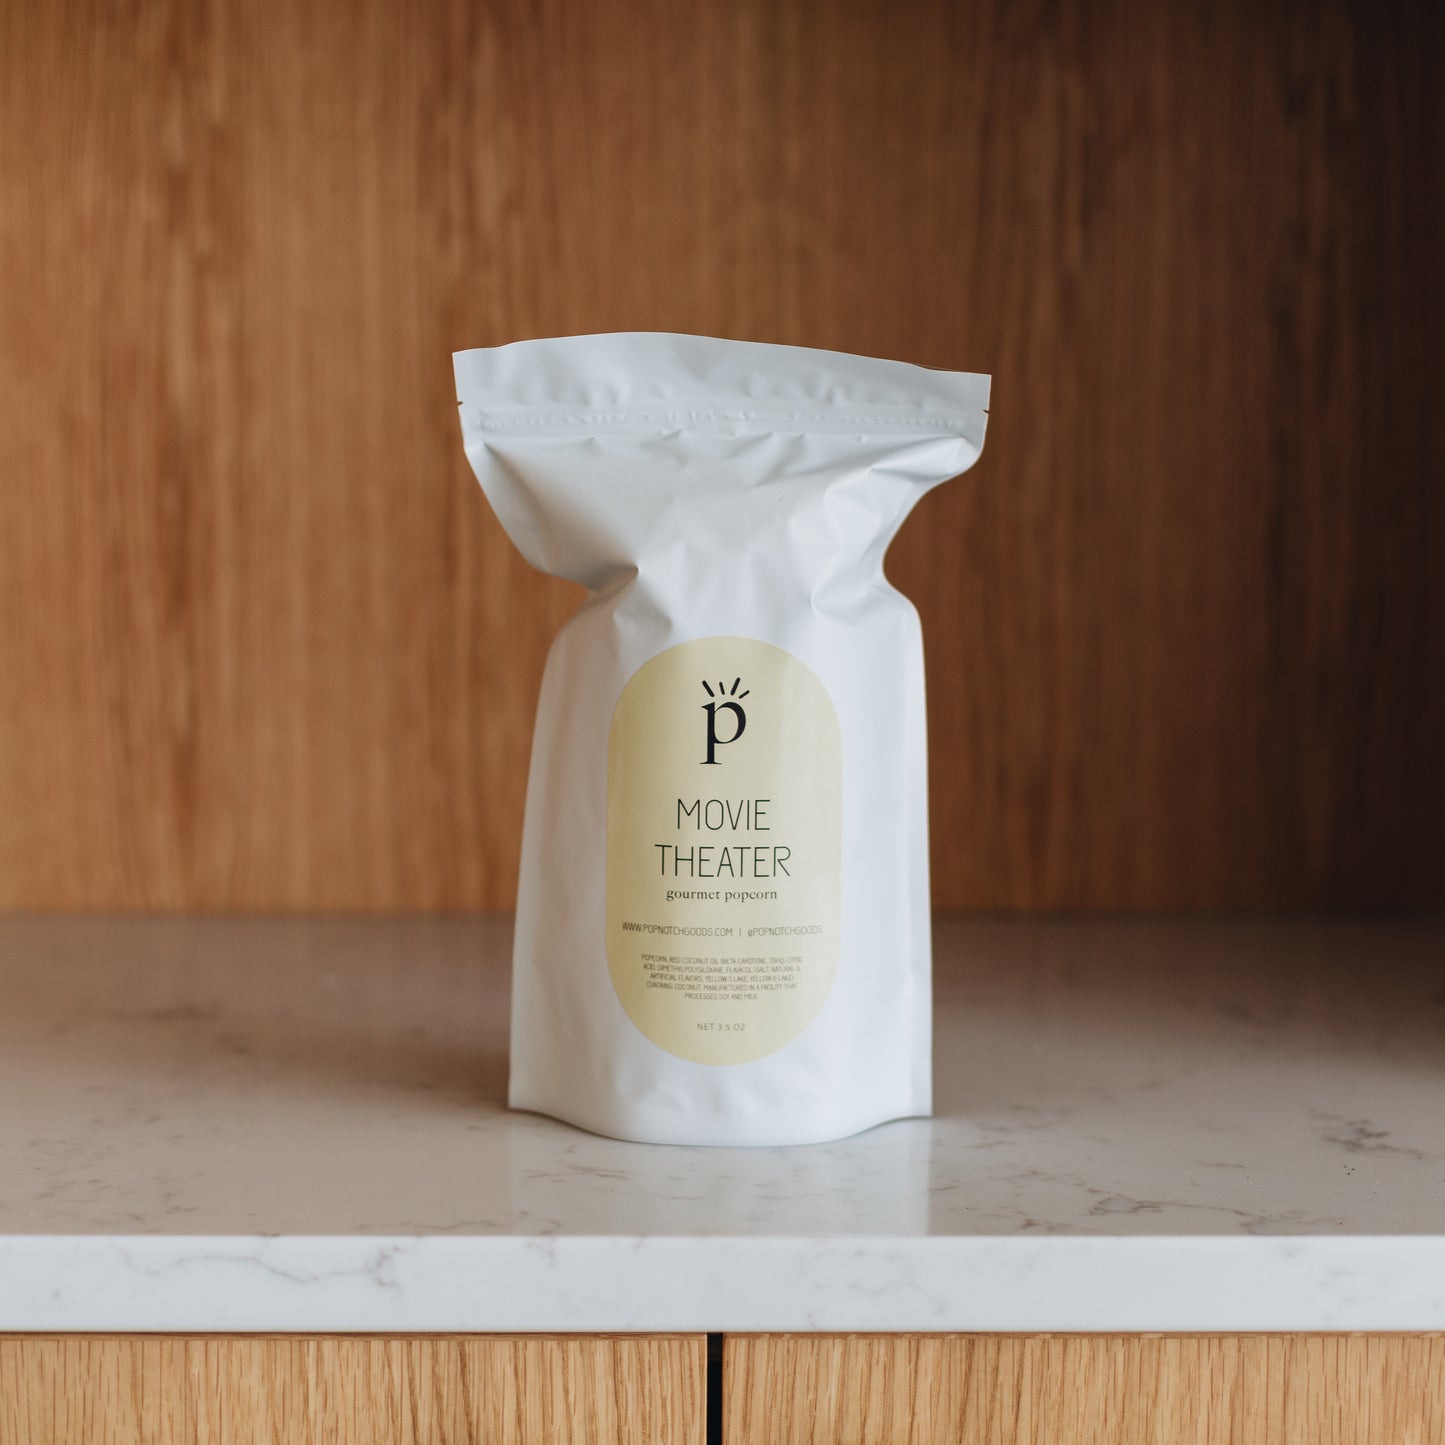 Bring the Movie Theater home with you. Popnotch Goods Movie Theater popcorn is the perfect combo of salt and butter. This is an everyday snack to keep in the house. Order online now or pick up a bag at Popnotch Goods! Featured is our Large Bag (3.5oz)